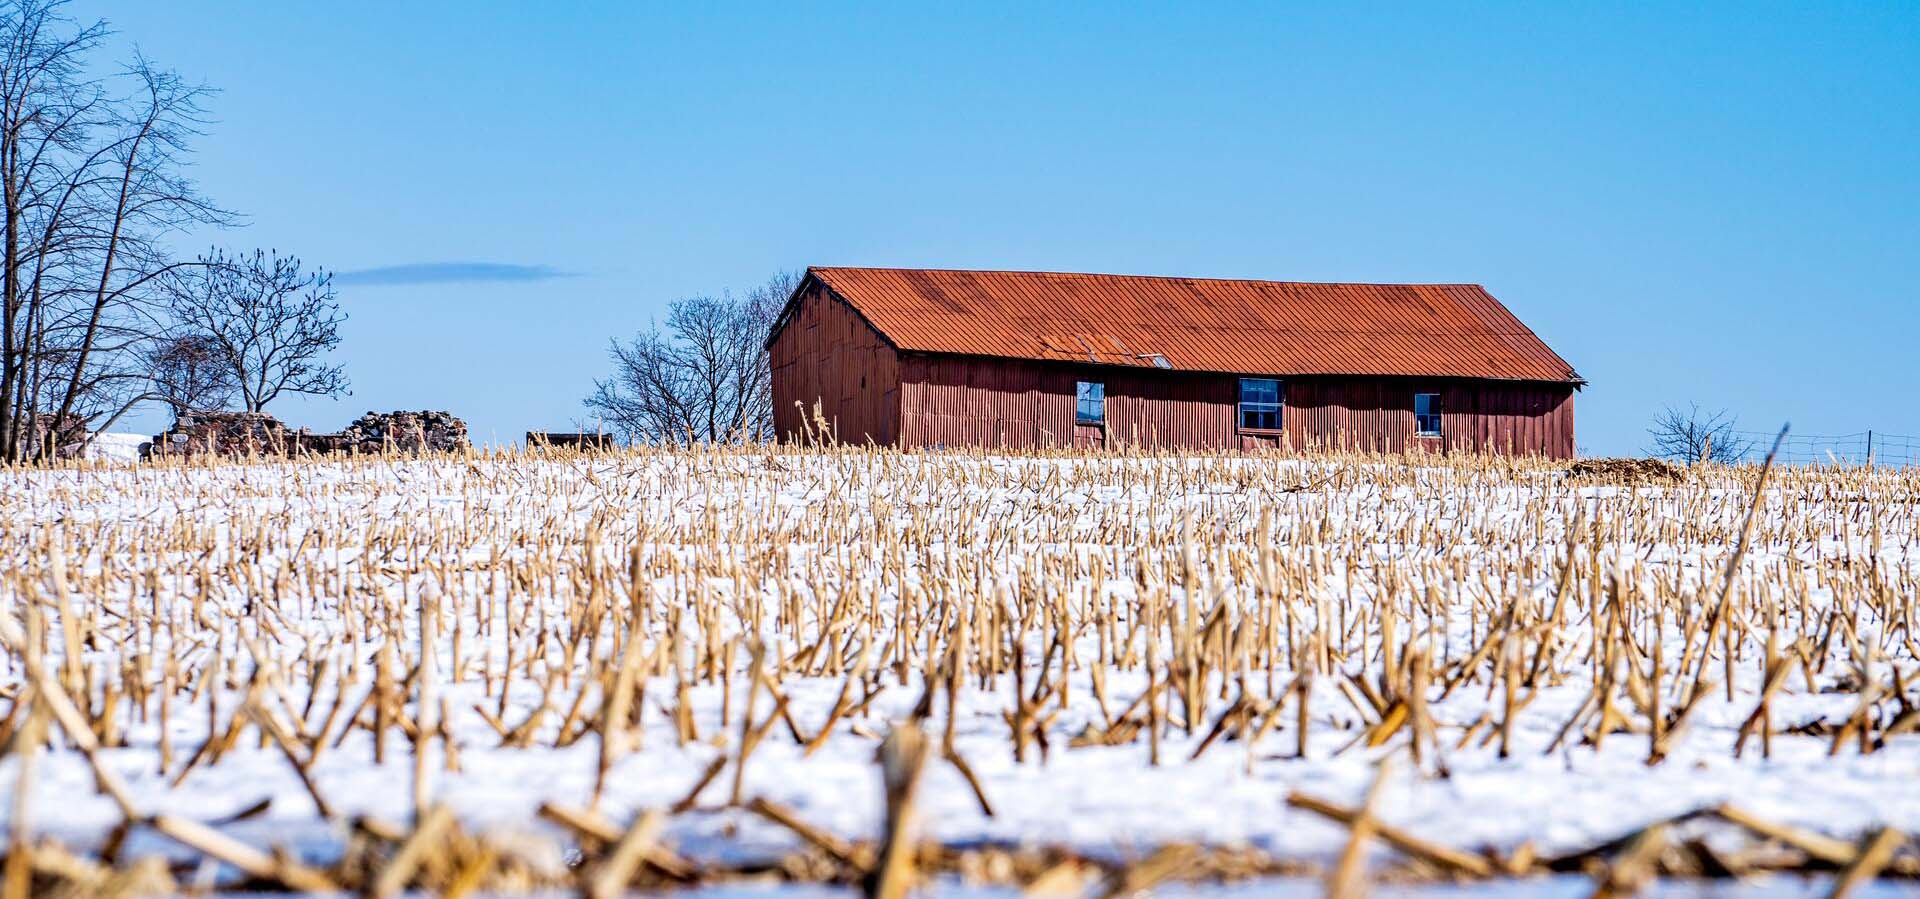 Farmer's field with corn stalks and snow.